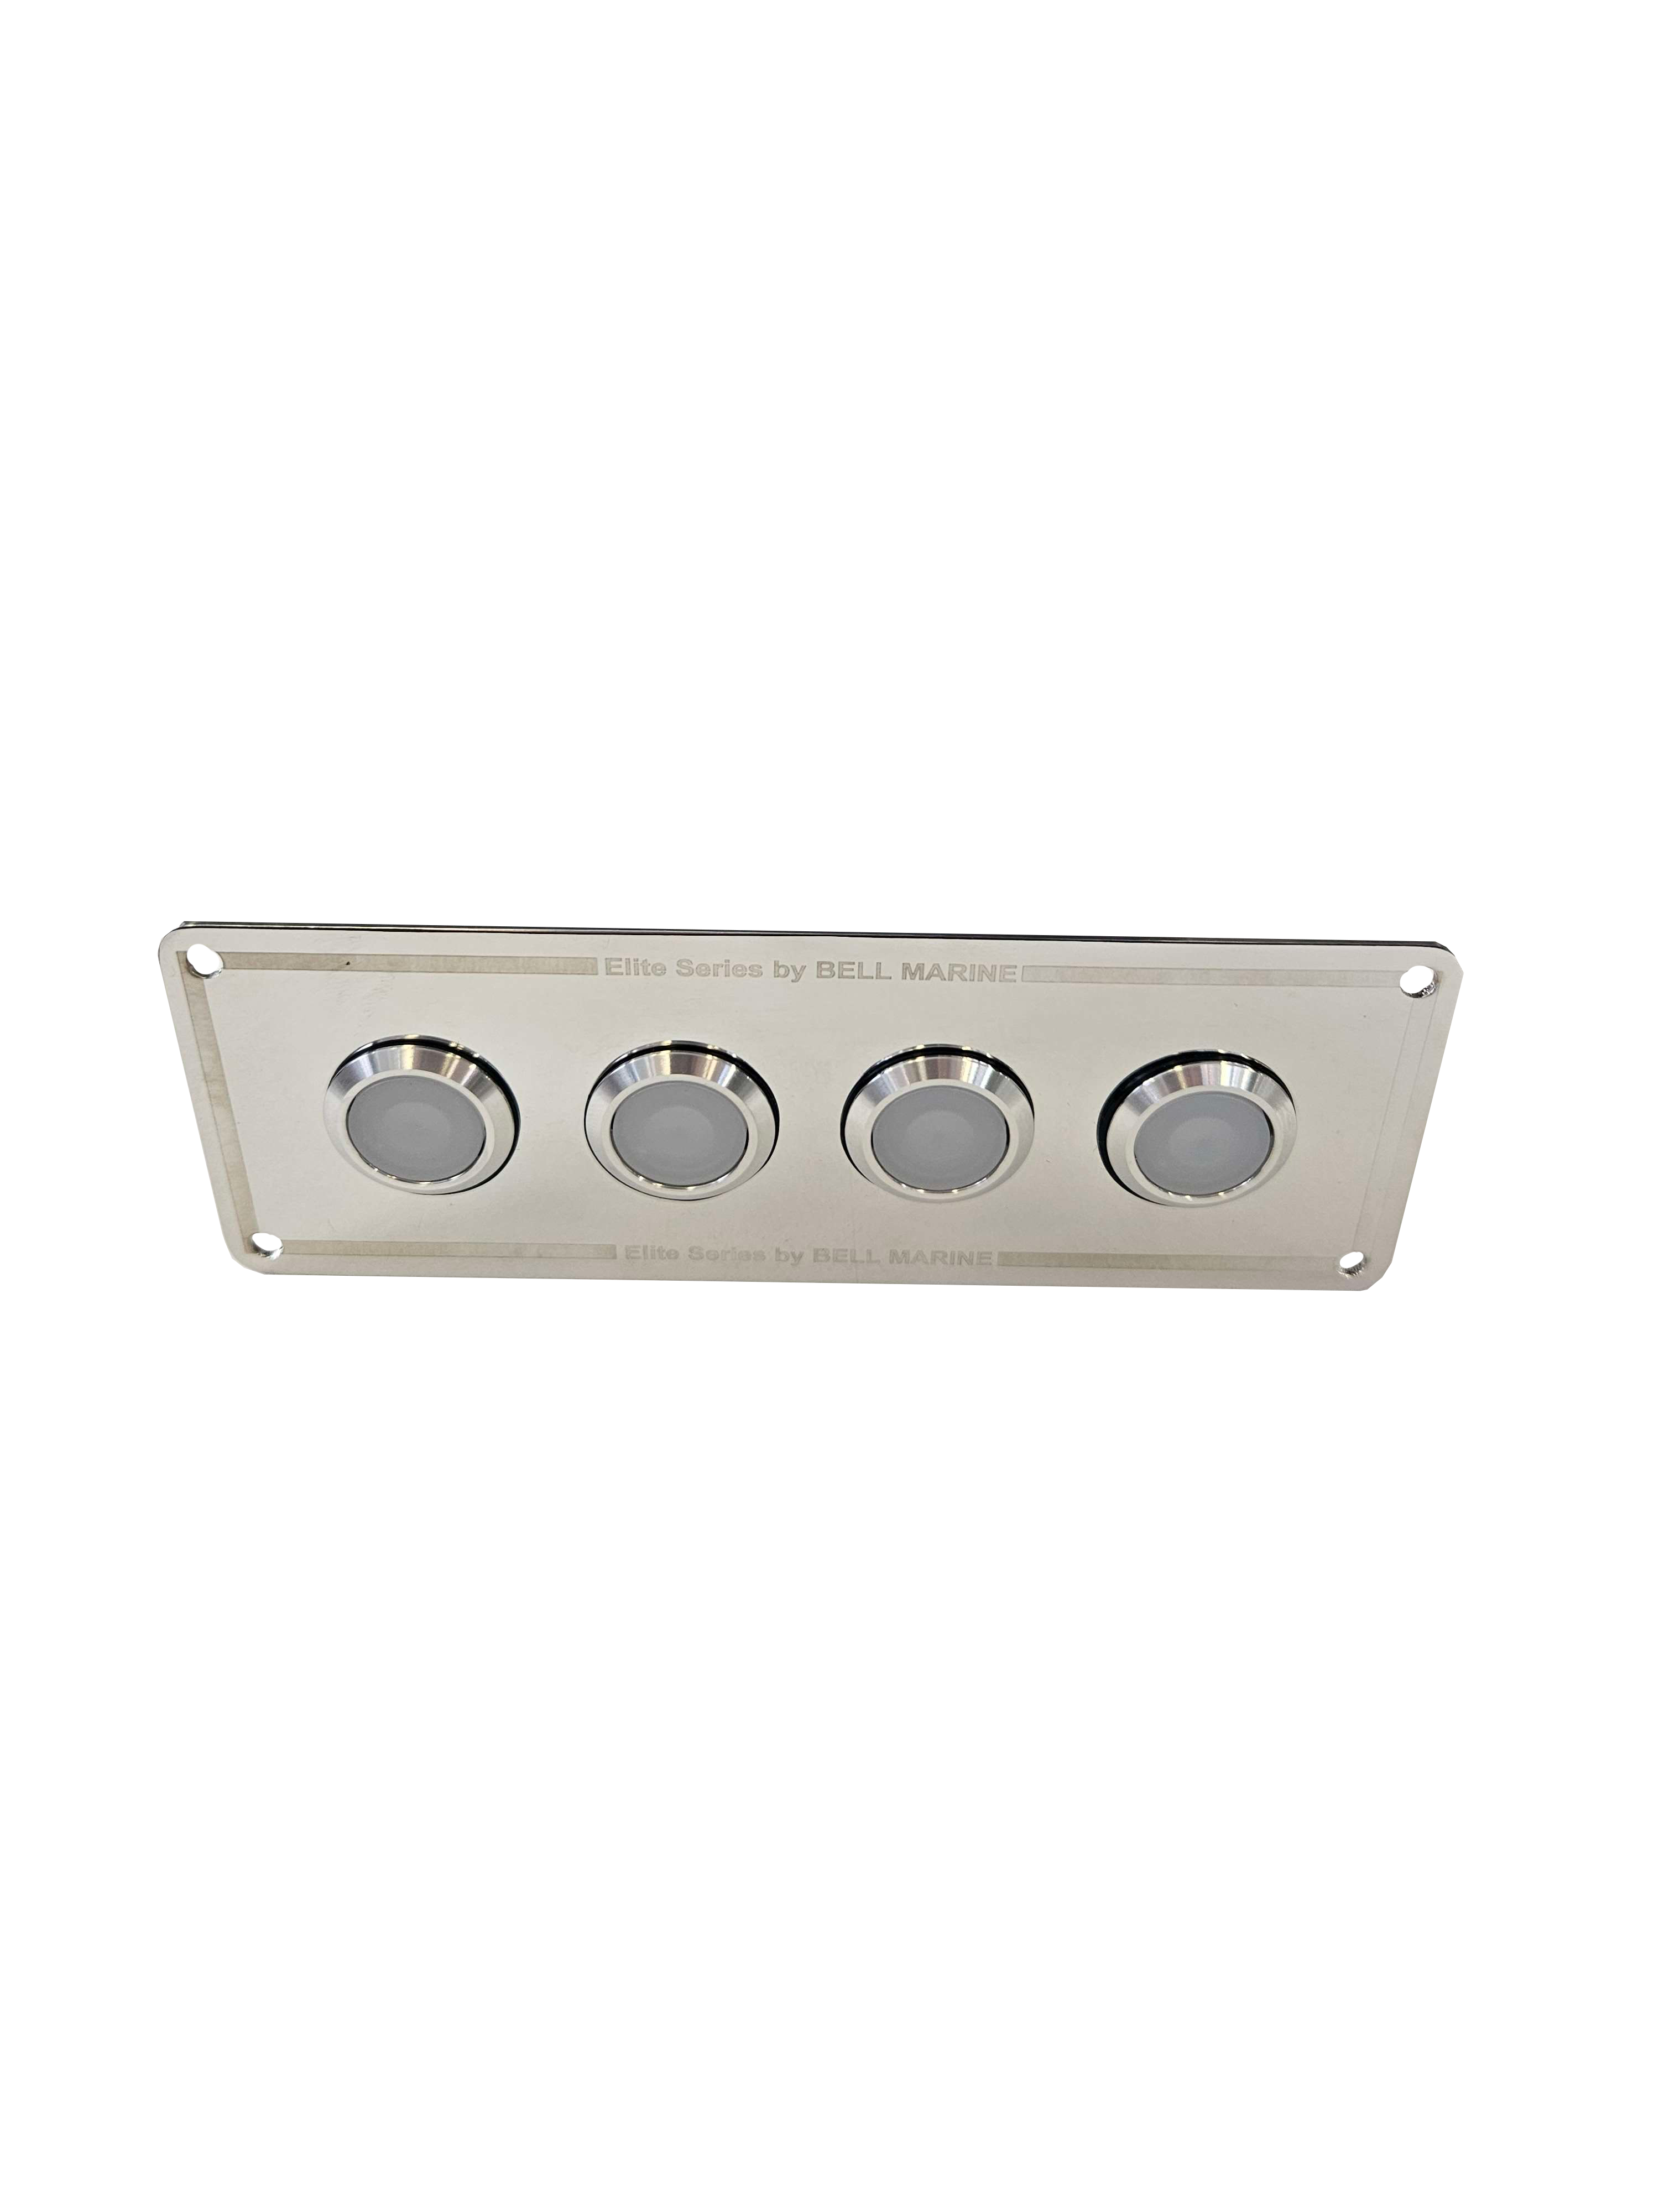 4 gang stainless steel switch panel with 20A backlit switches